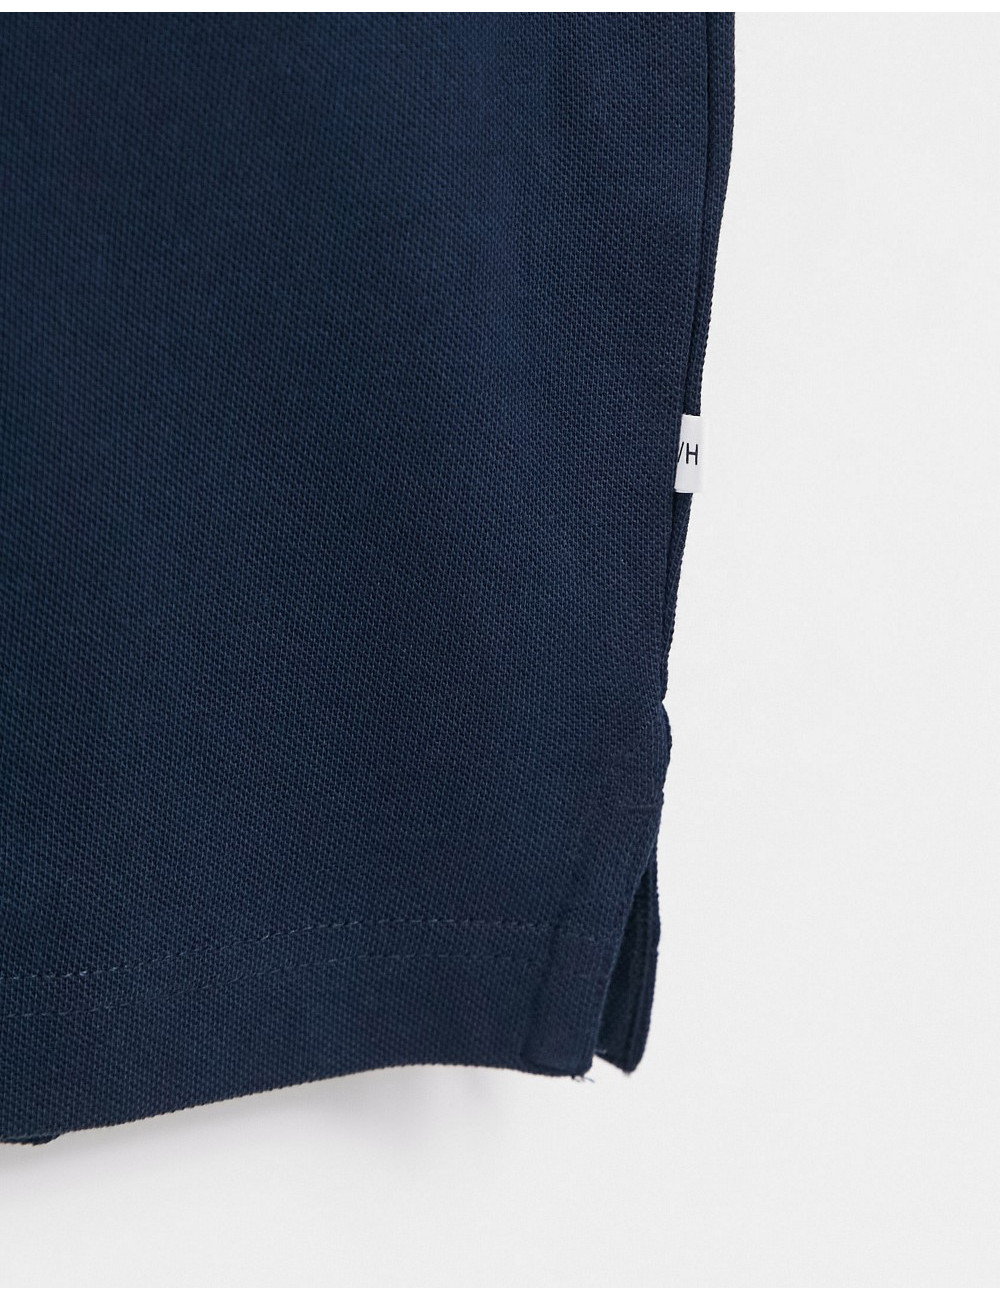 Selected Homme polo in navy